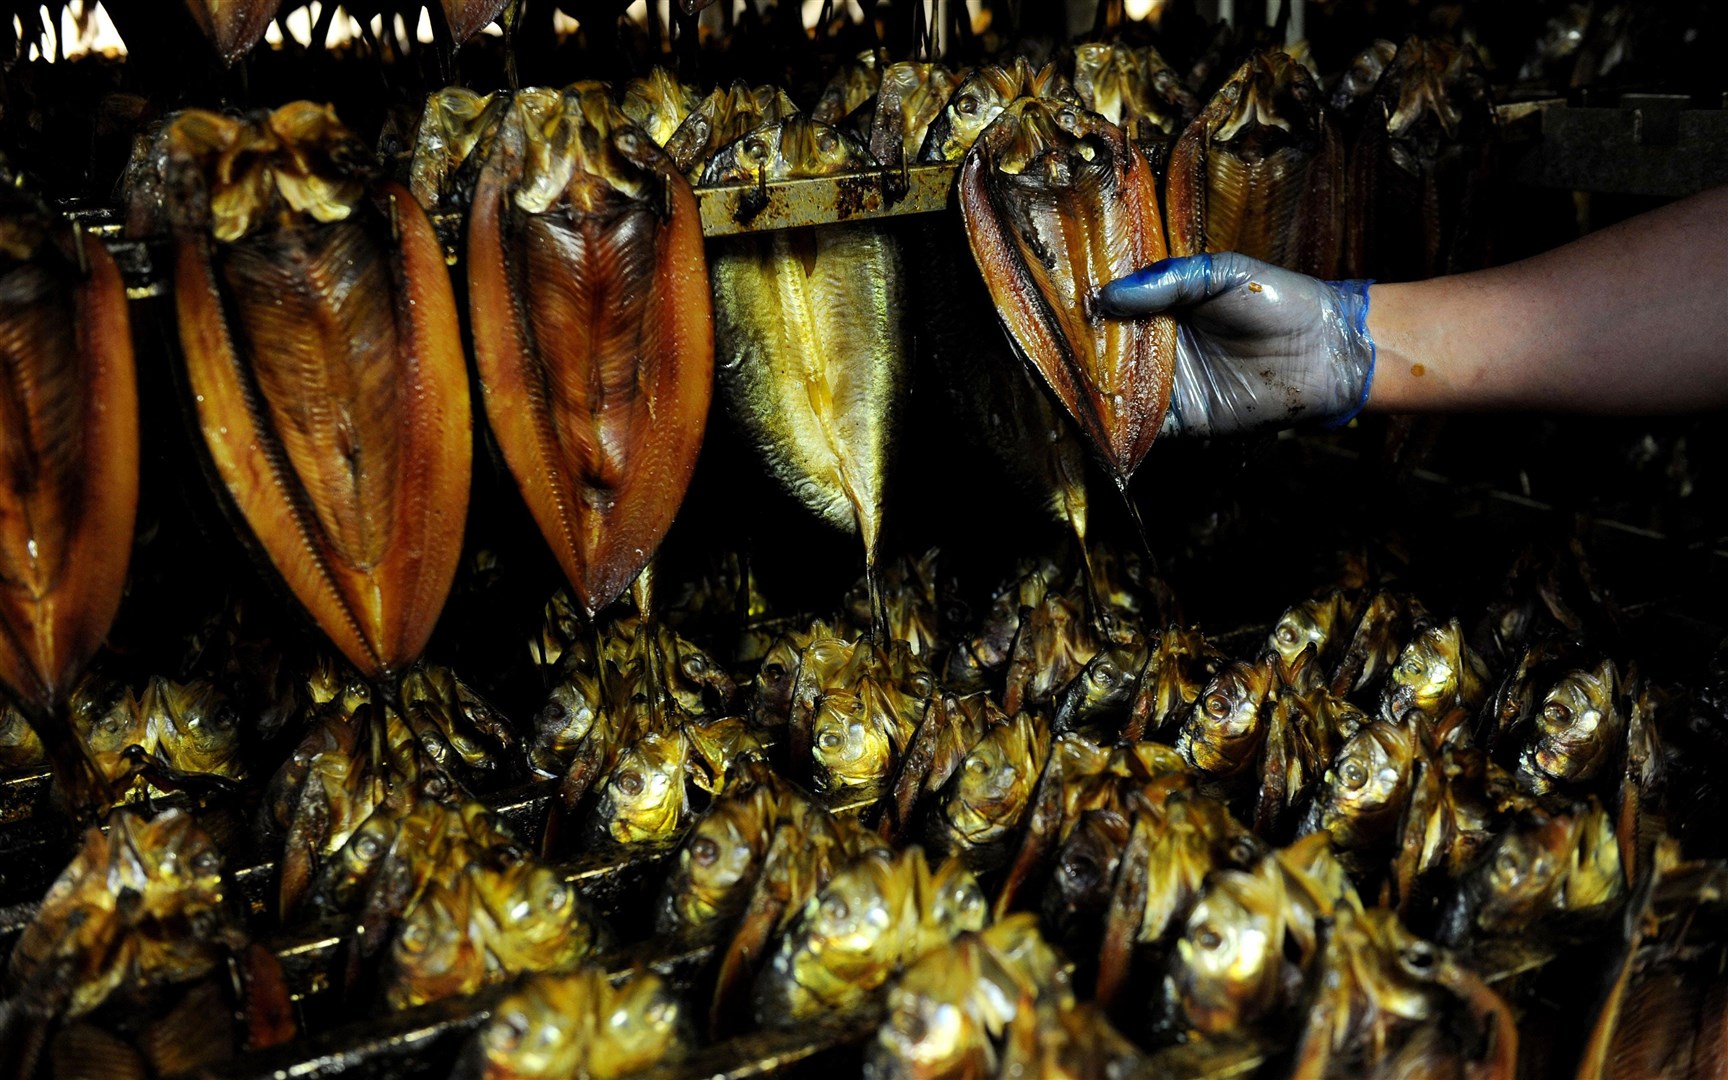 Craster kippers are renowned for their quality, and are a healthy, oily fish (Owen Humphreys/PA)